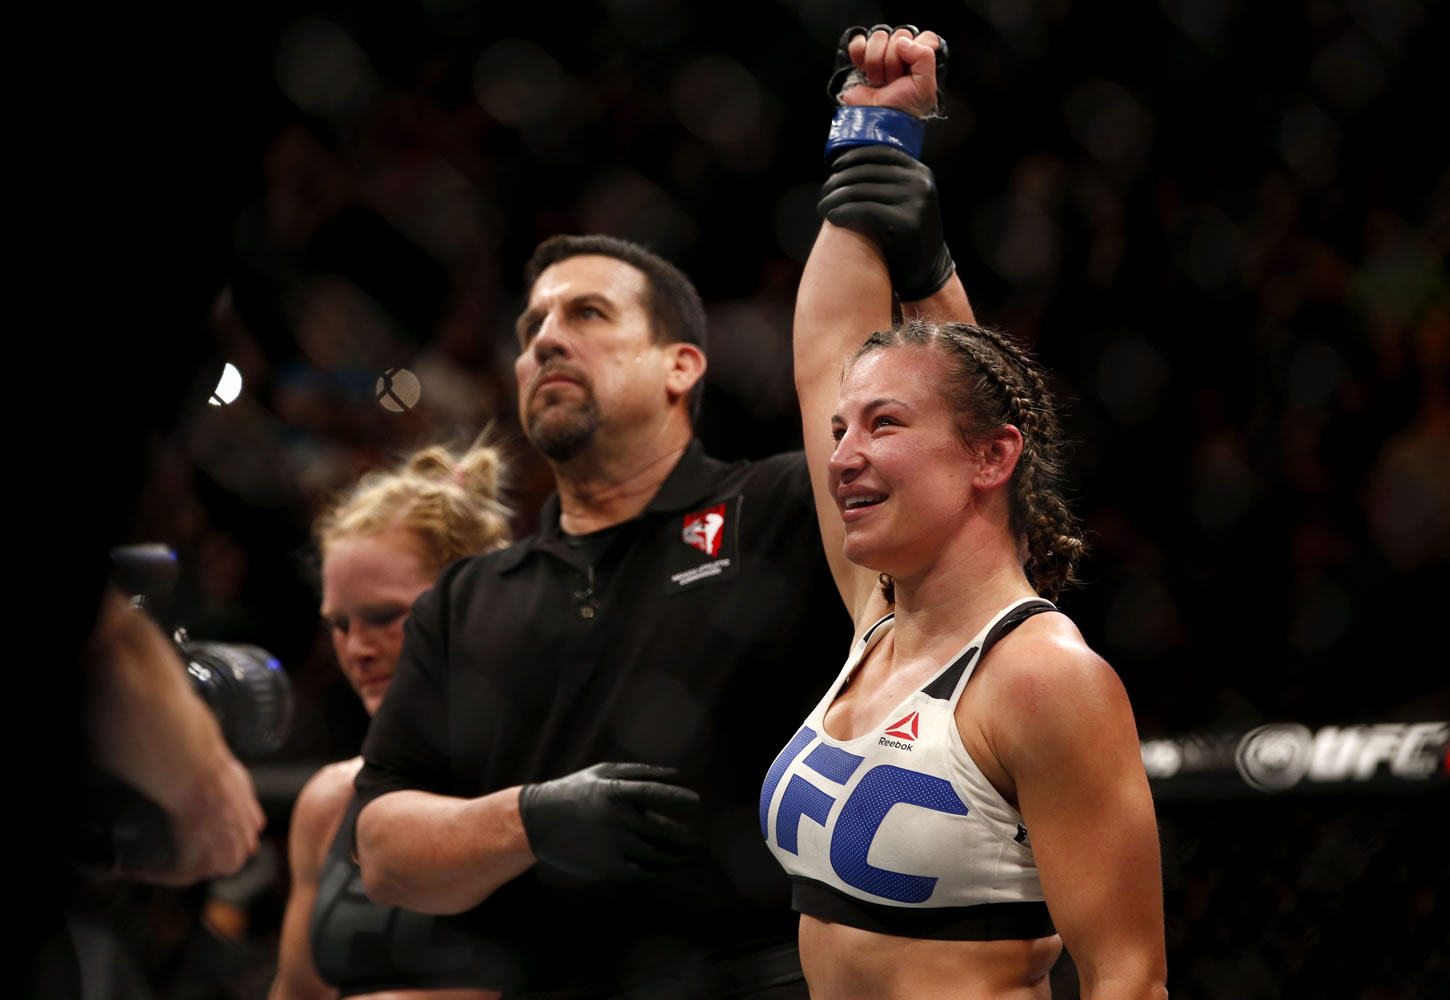 Tacoma's Miesha Tate, right, celebrates victory over Holly Holm during their UFC 196 women's bantamweight mixed martial arts match, Saturday, March 5, 2016, in Las Vegas.